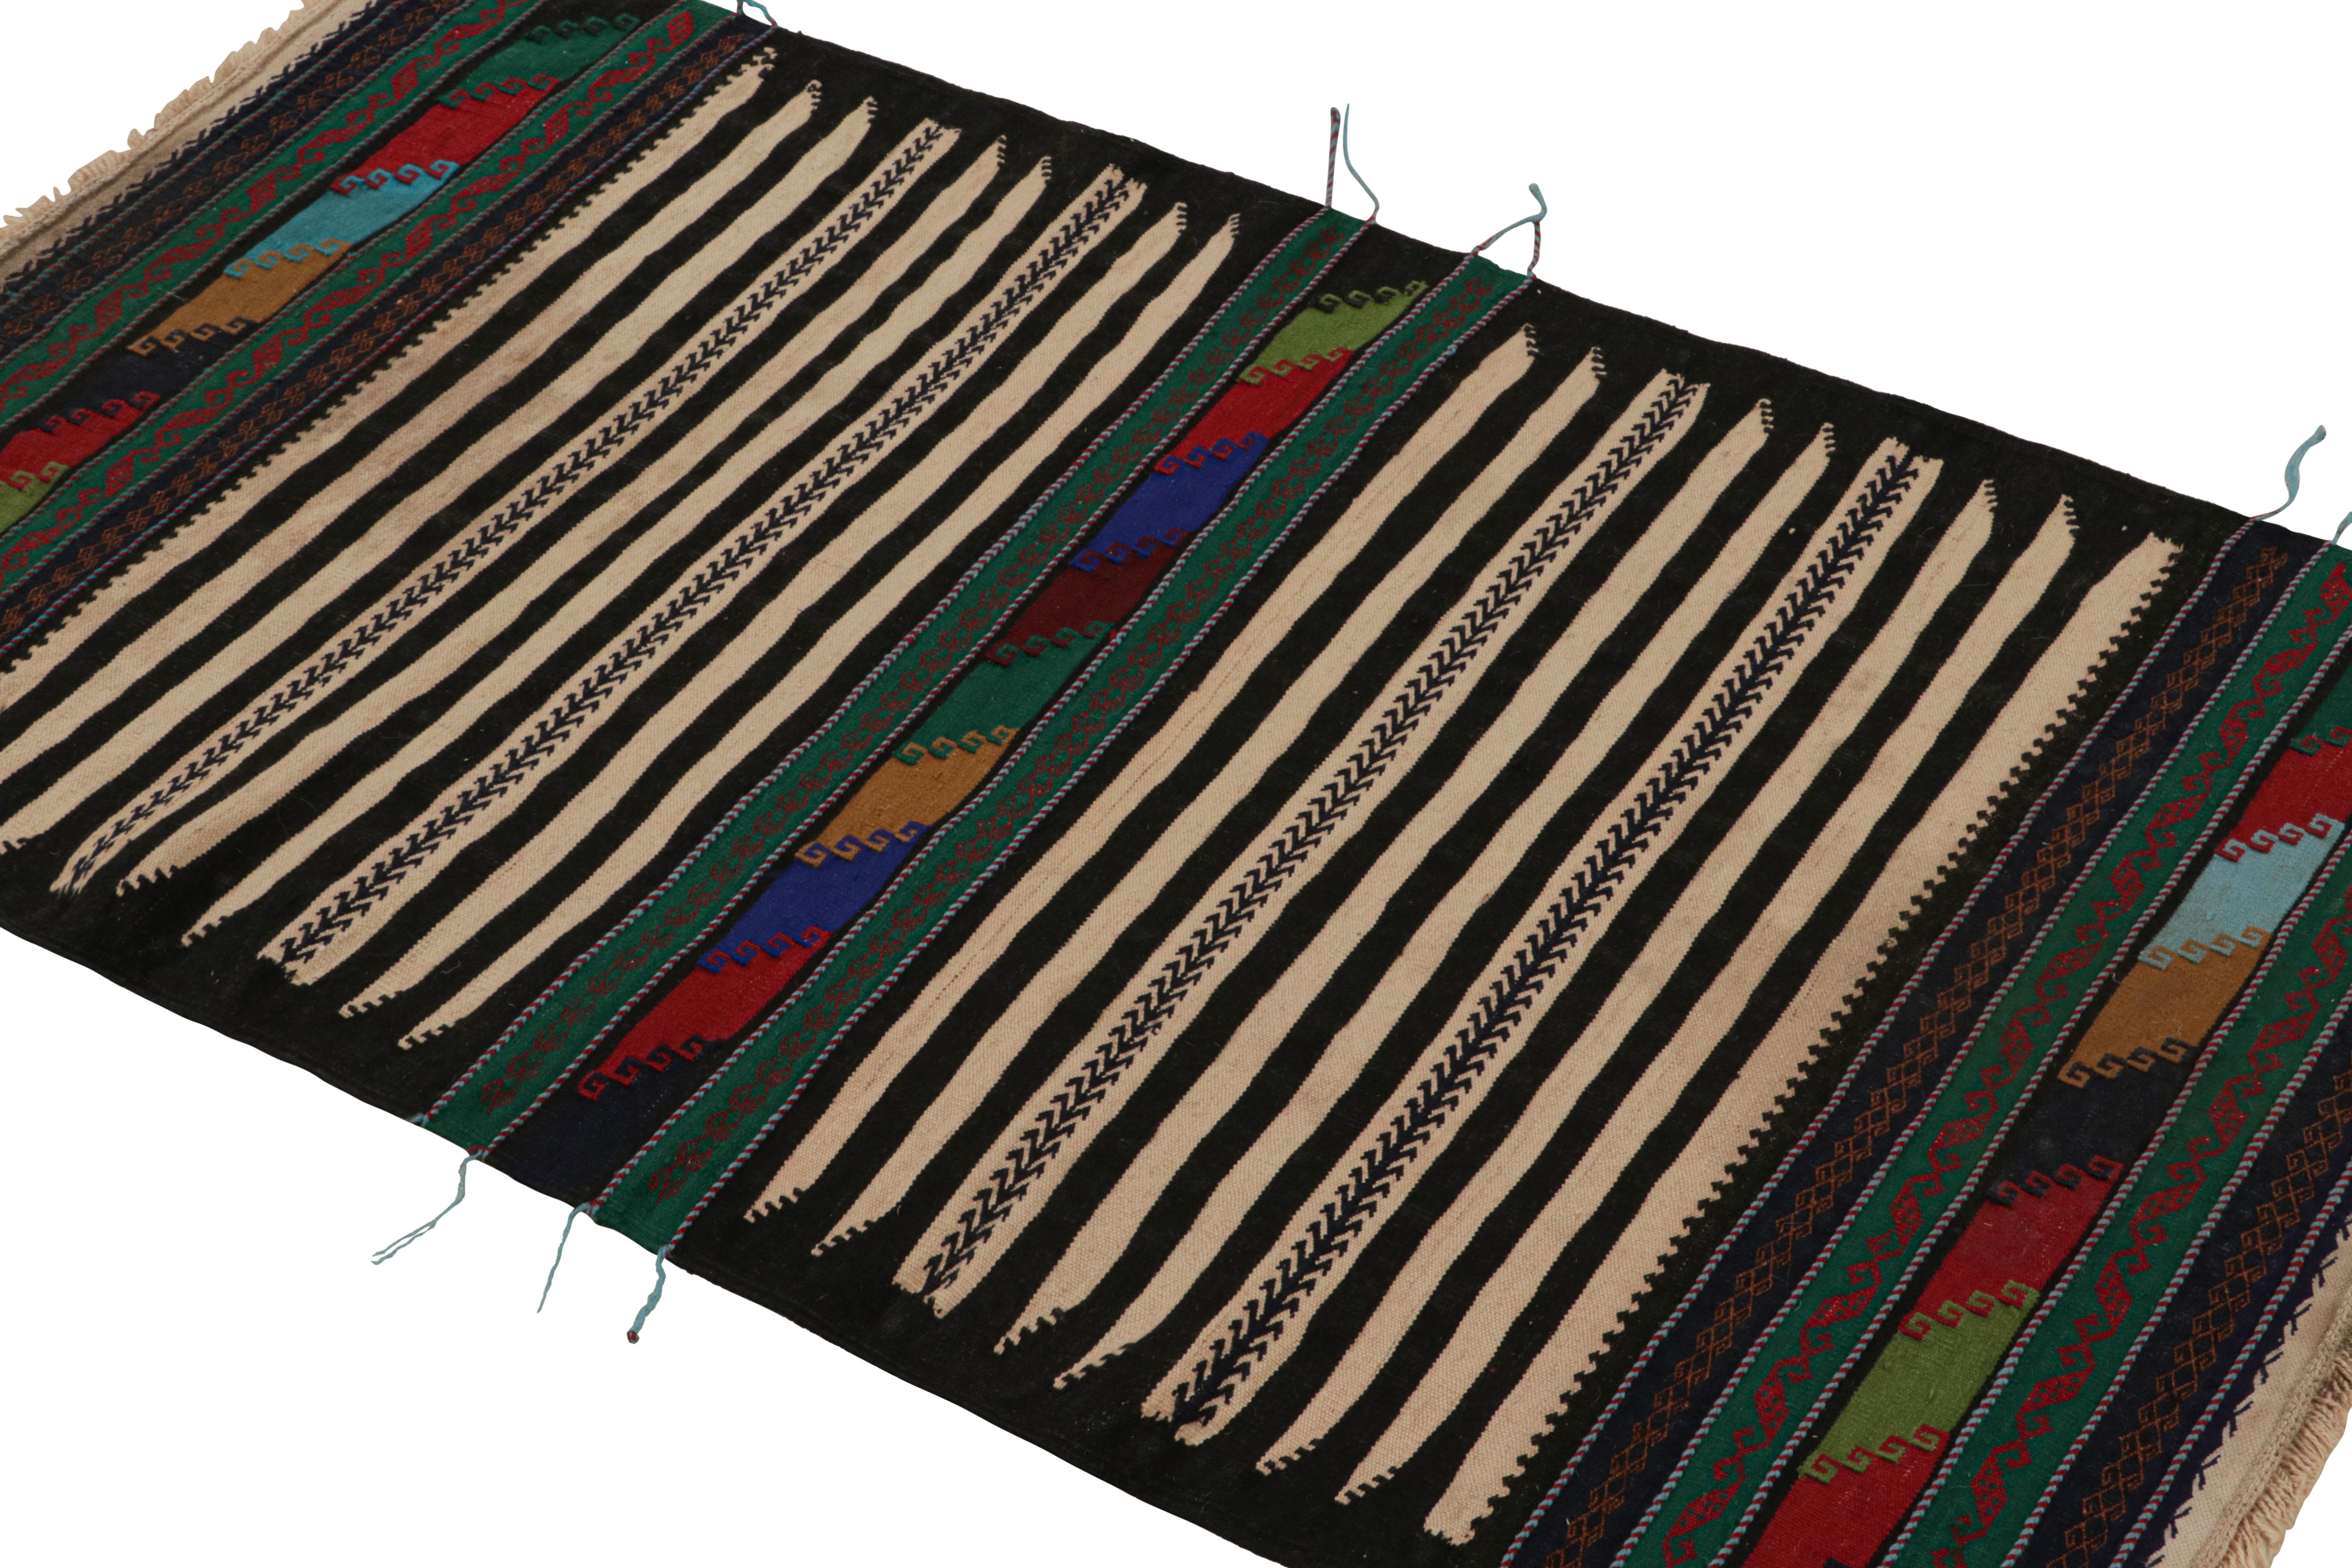 Handwoven in wool, this 3x4 vintage Afghan kilim rug originates circa 1950-1960—a tribal curation among new additions to the Rug & Kilim collection.

On the Design:

A polychromatic colorway with both rich and vibrant hues underscores both stripes